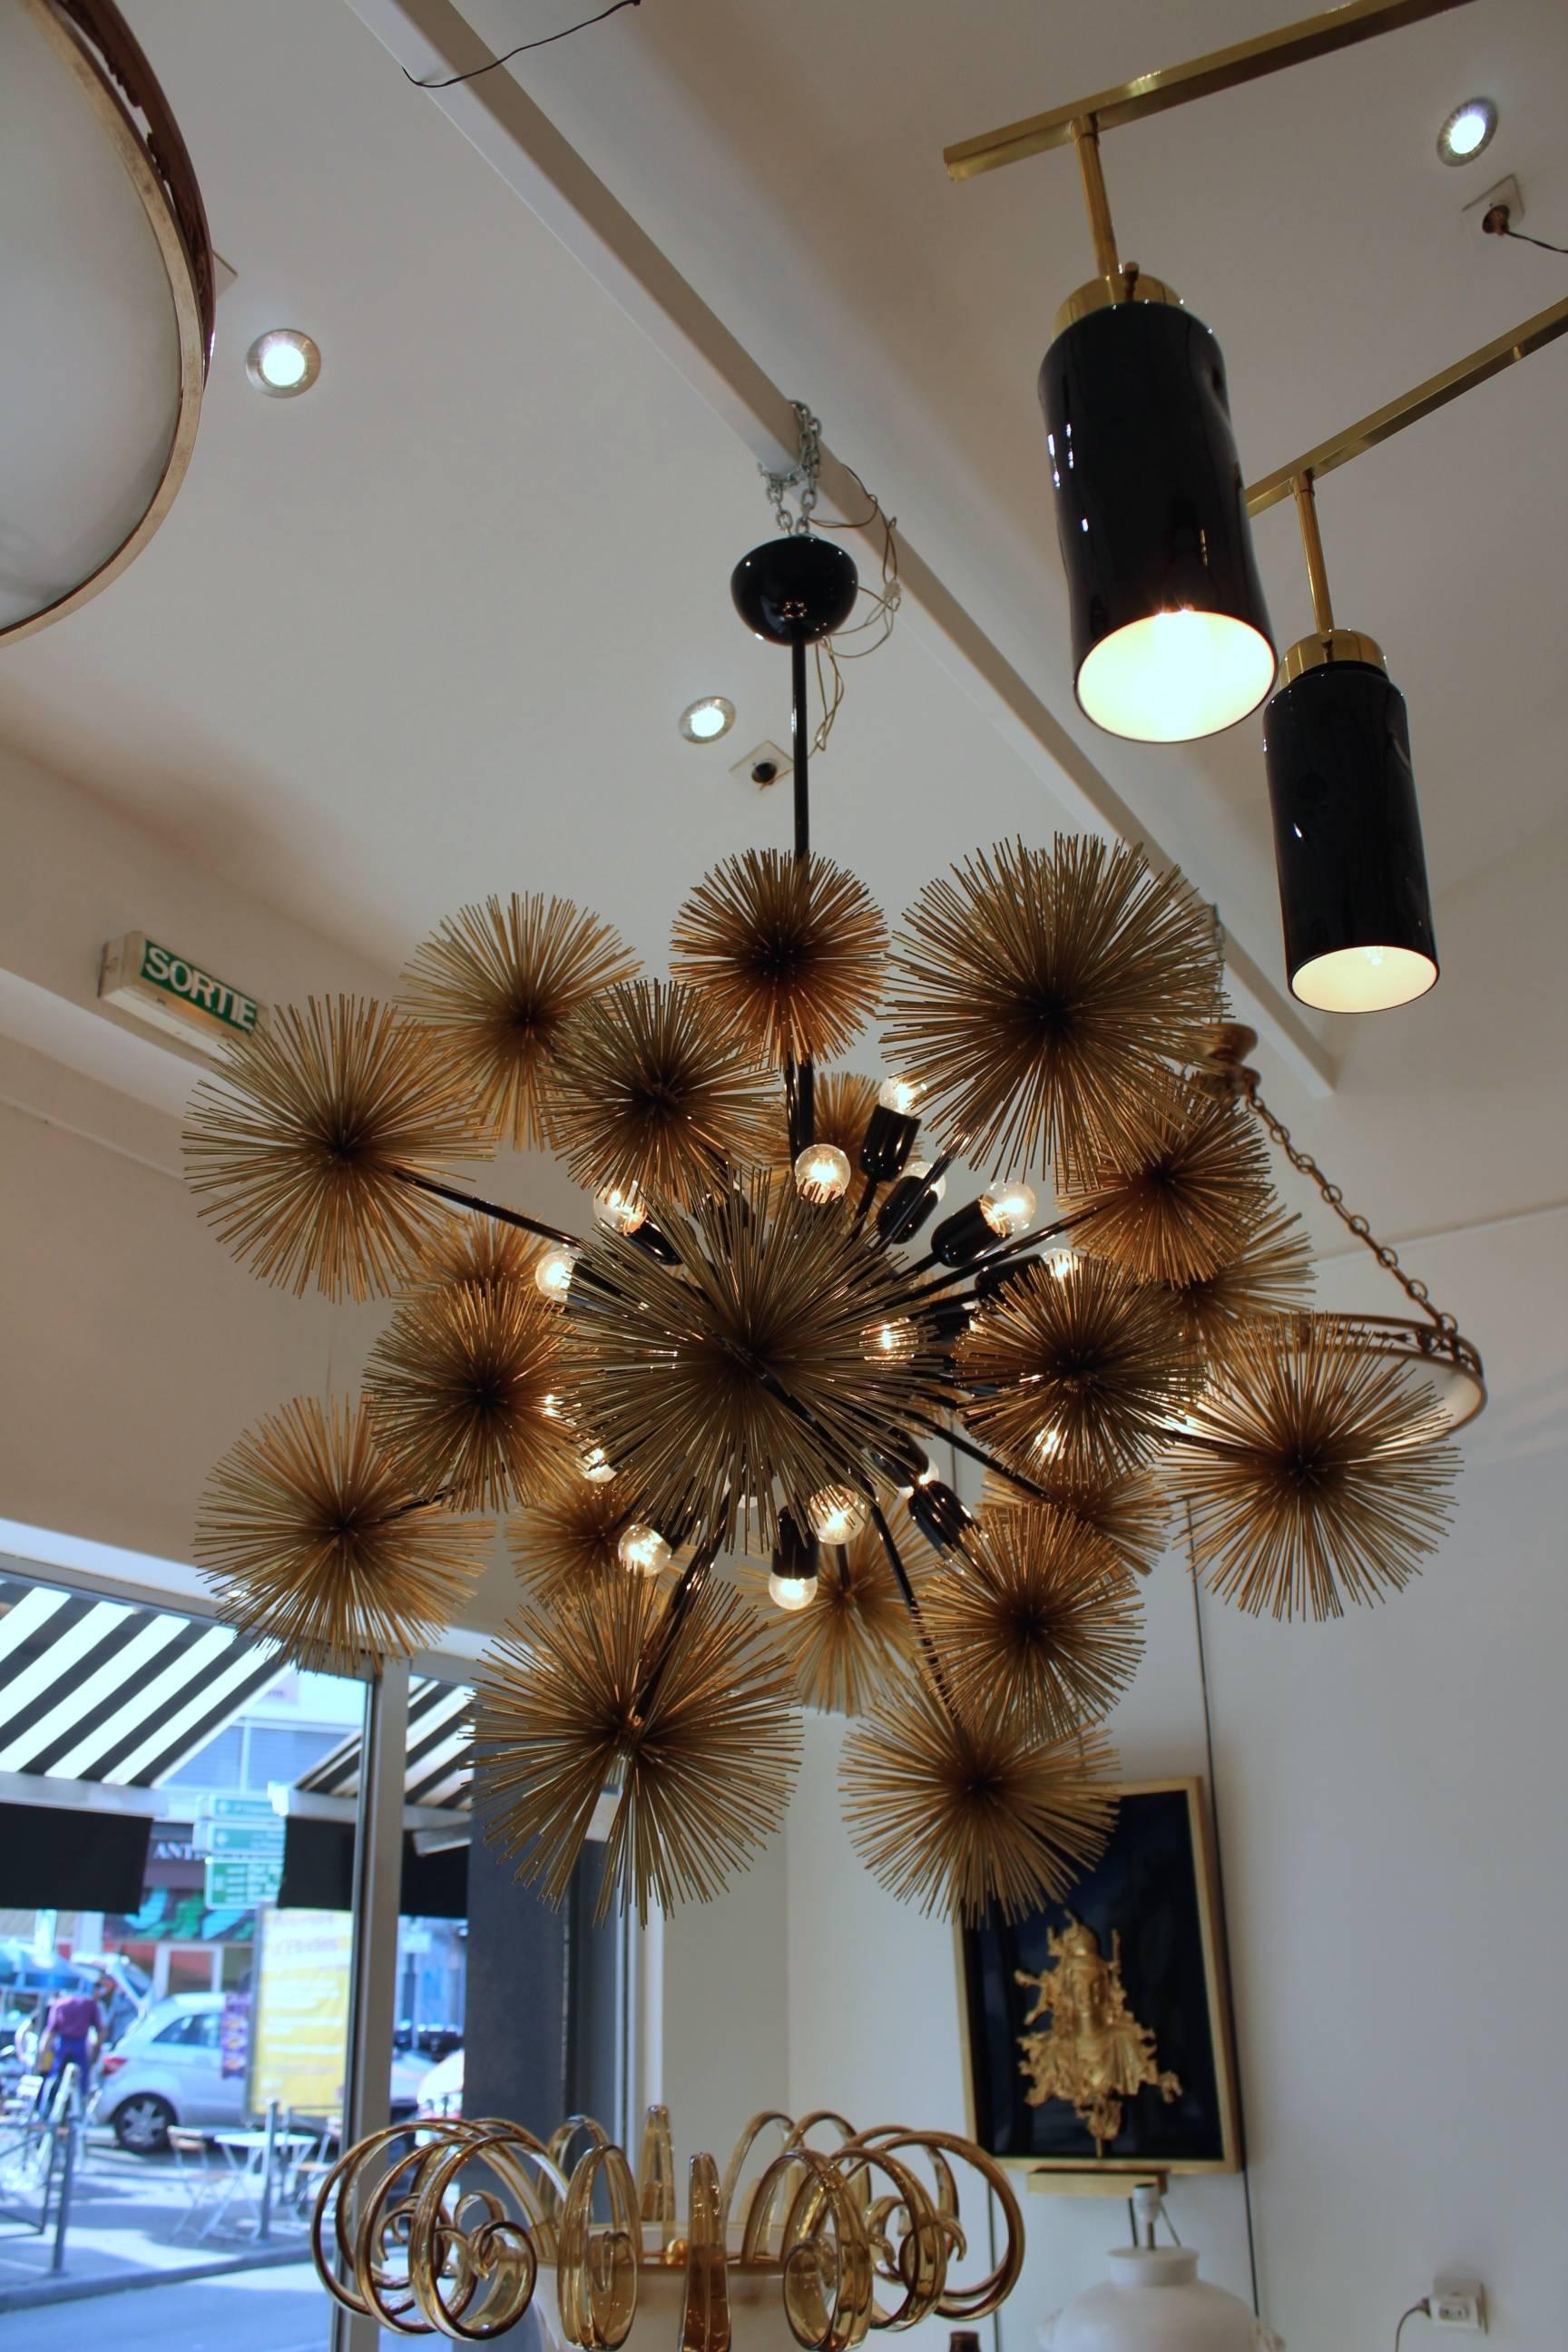 Beautiful and unusual sputnik chandelier, metal painted gold and black,
in excellent condition.